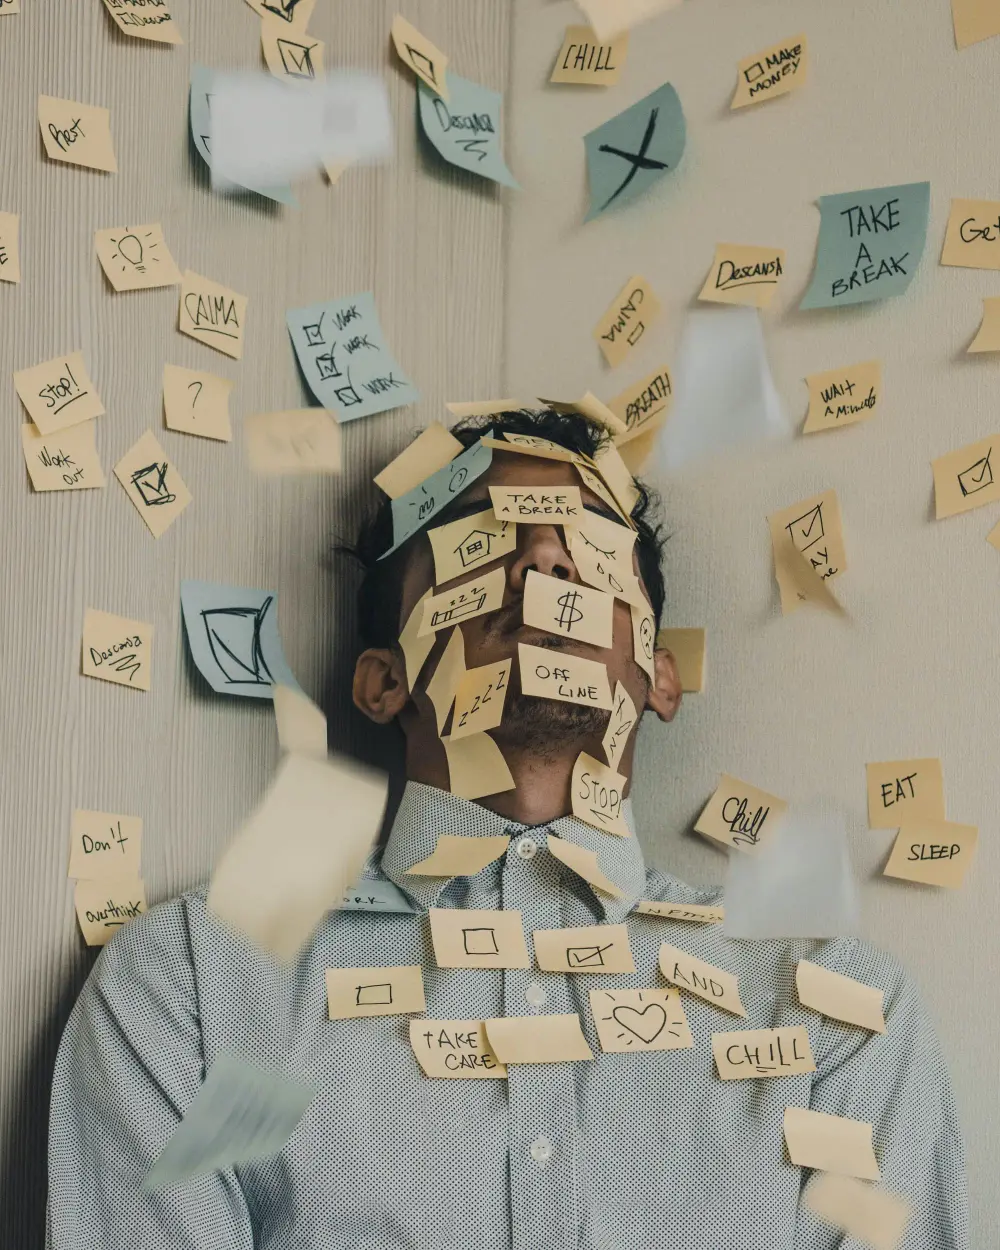 Post it notes falling all over a men and sticked top  a wall with tasks on them.